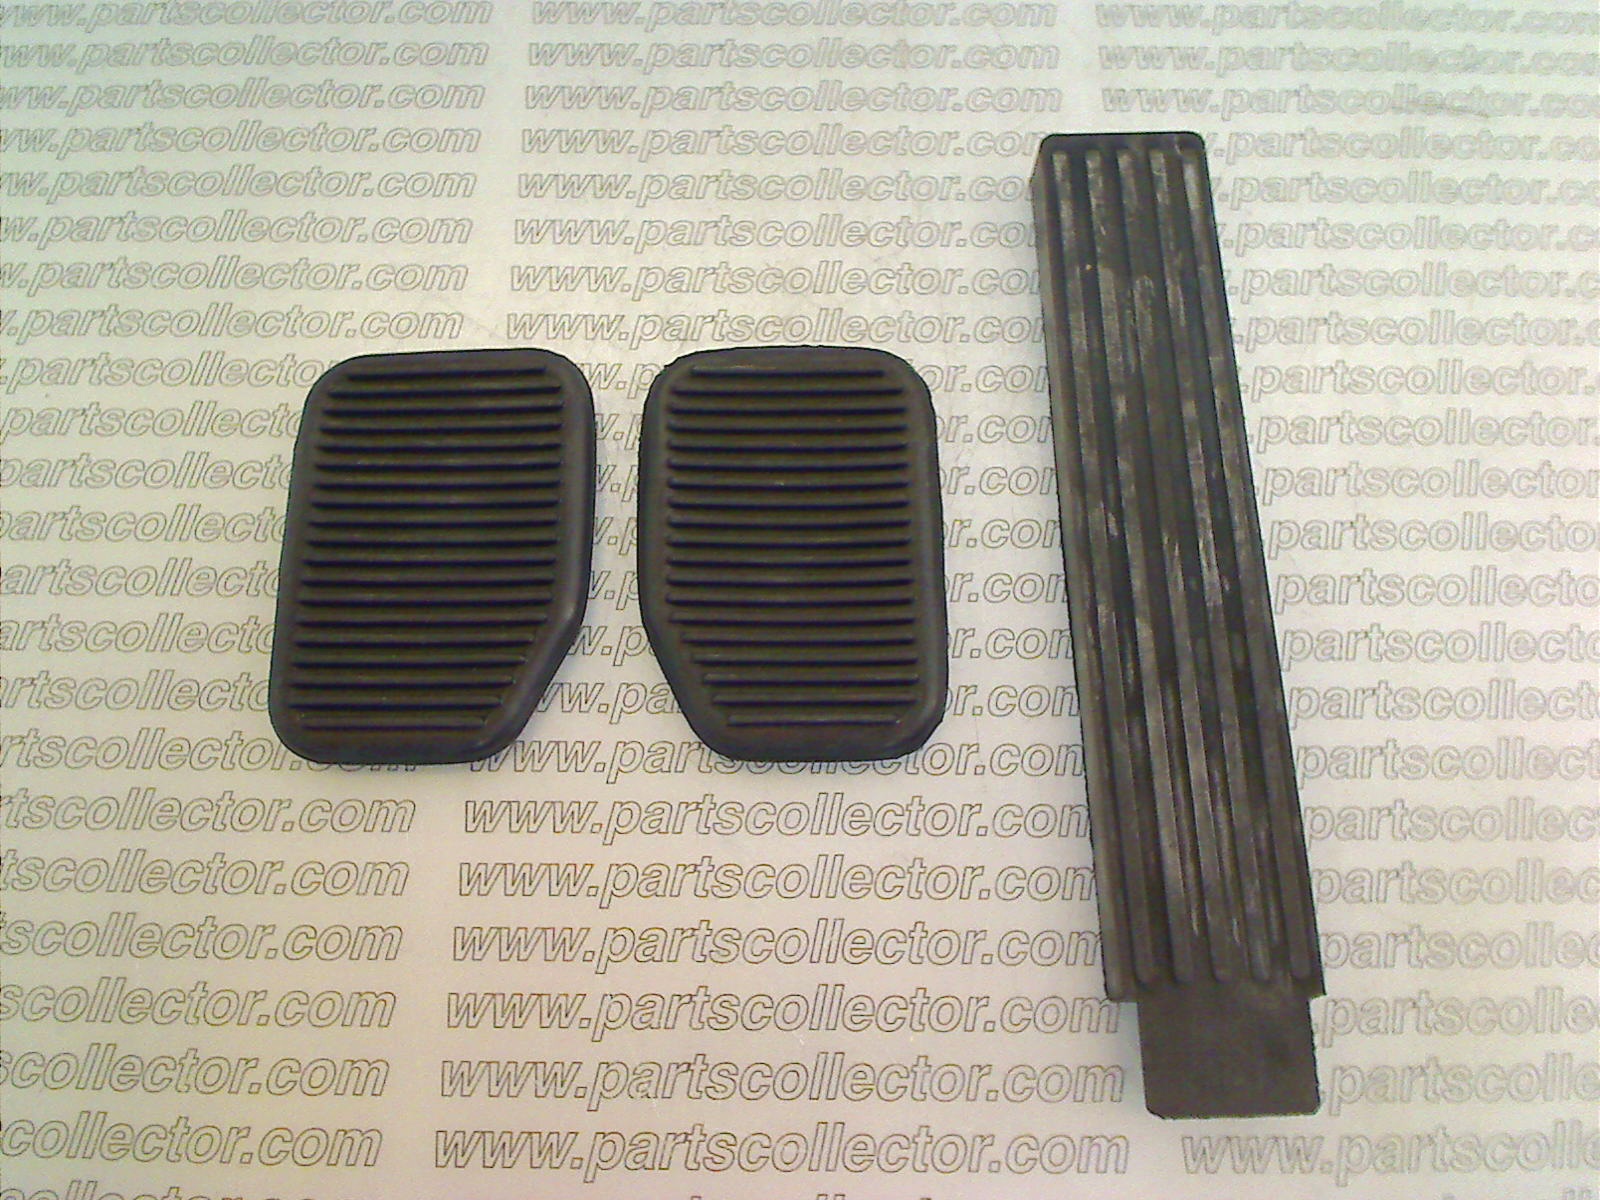 PEDAL RUBER COVERS